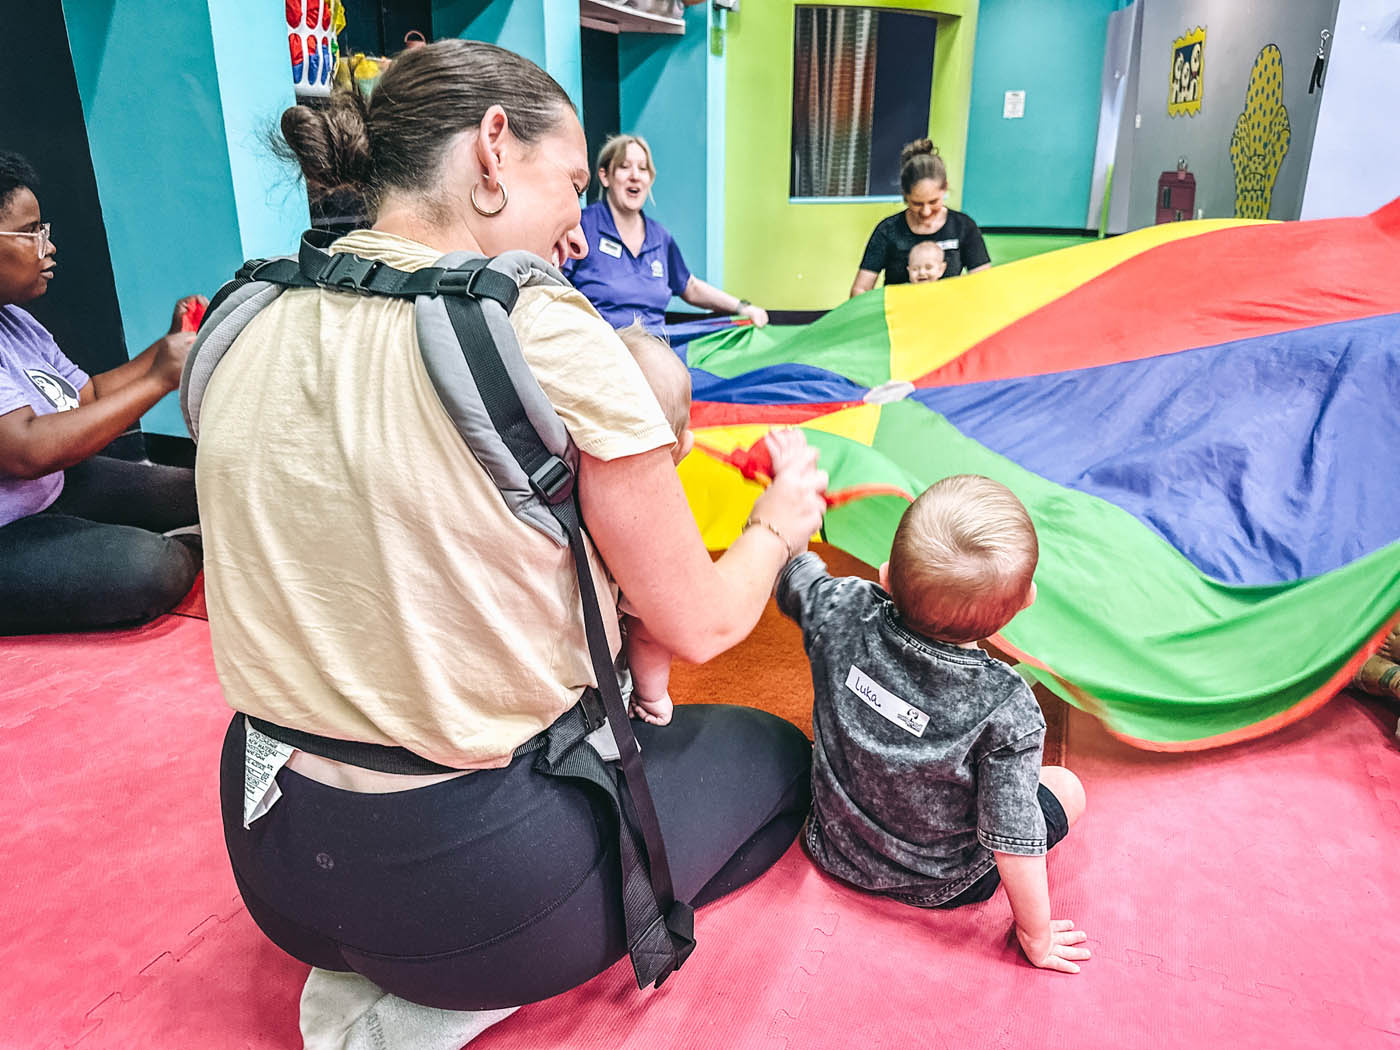 A Romp n' Roll instructor with kids during parachute playtime - join an indoor playground franchise with us!